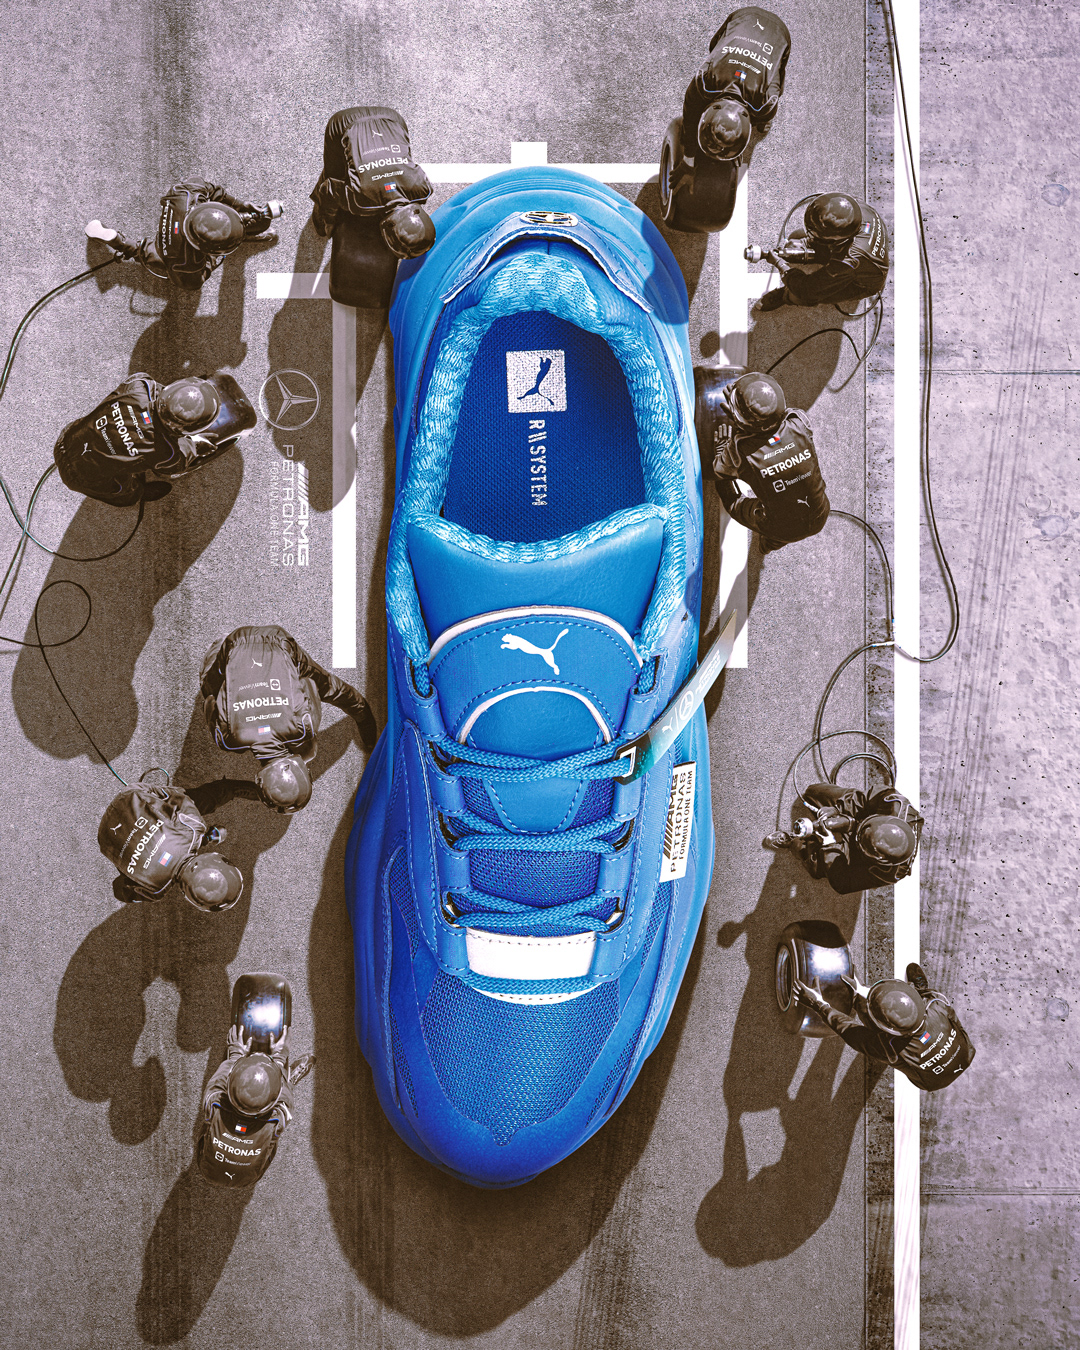 This is a Photoshop composite of a giant Puma sneaker at a Formula 1 pitstop.